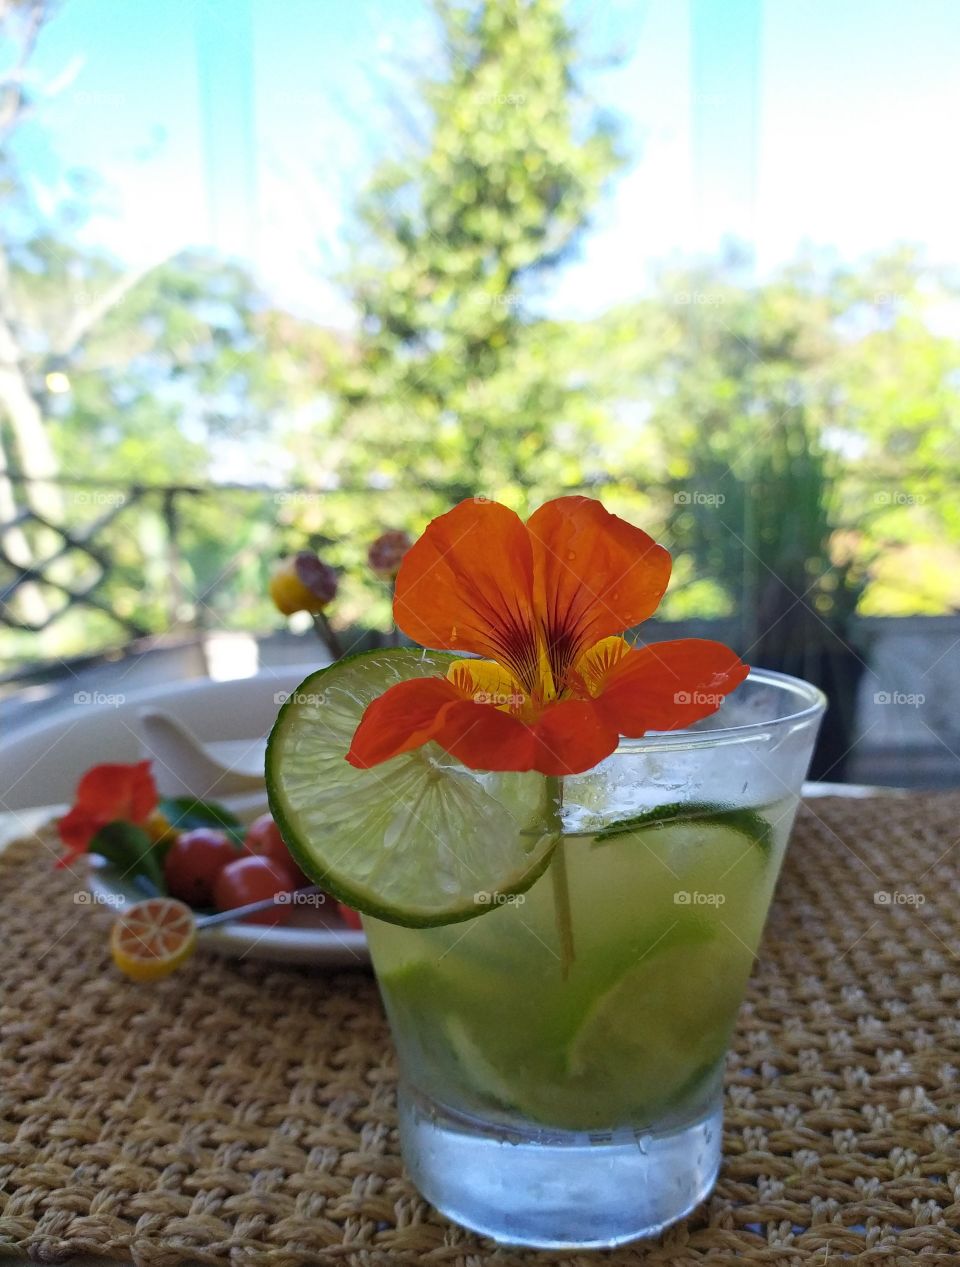 This is a drink from Brazil called "caipirinha"